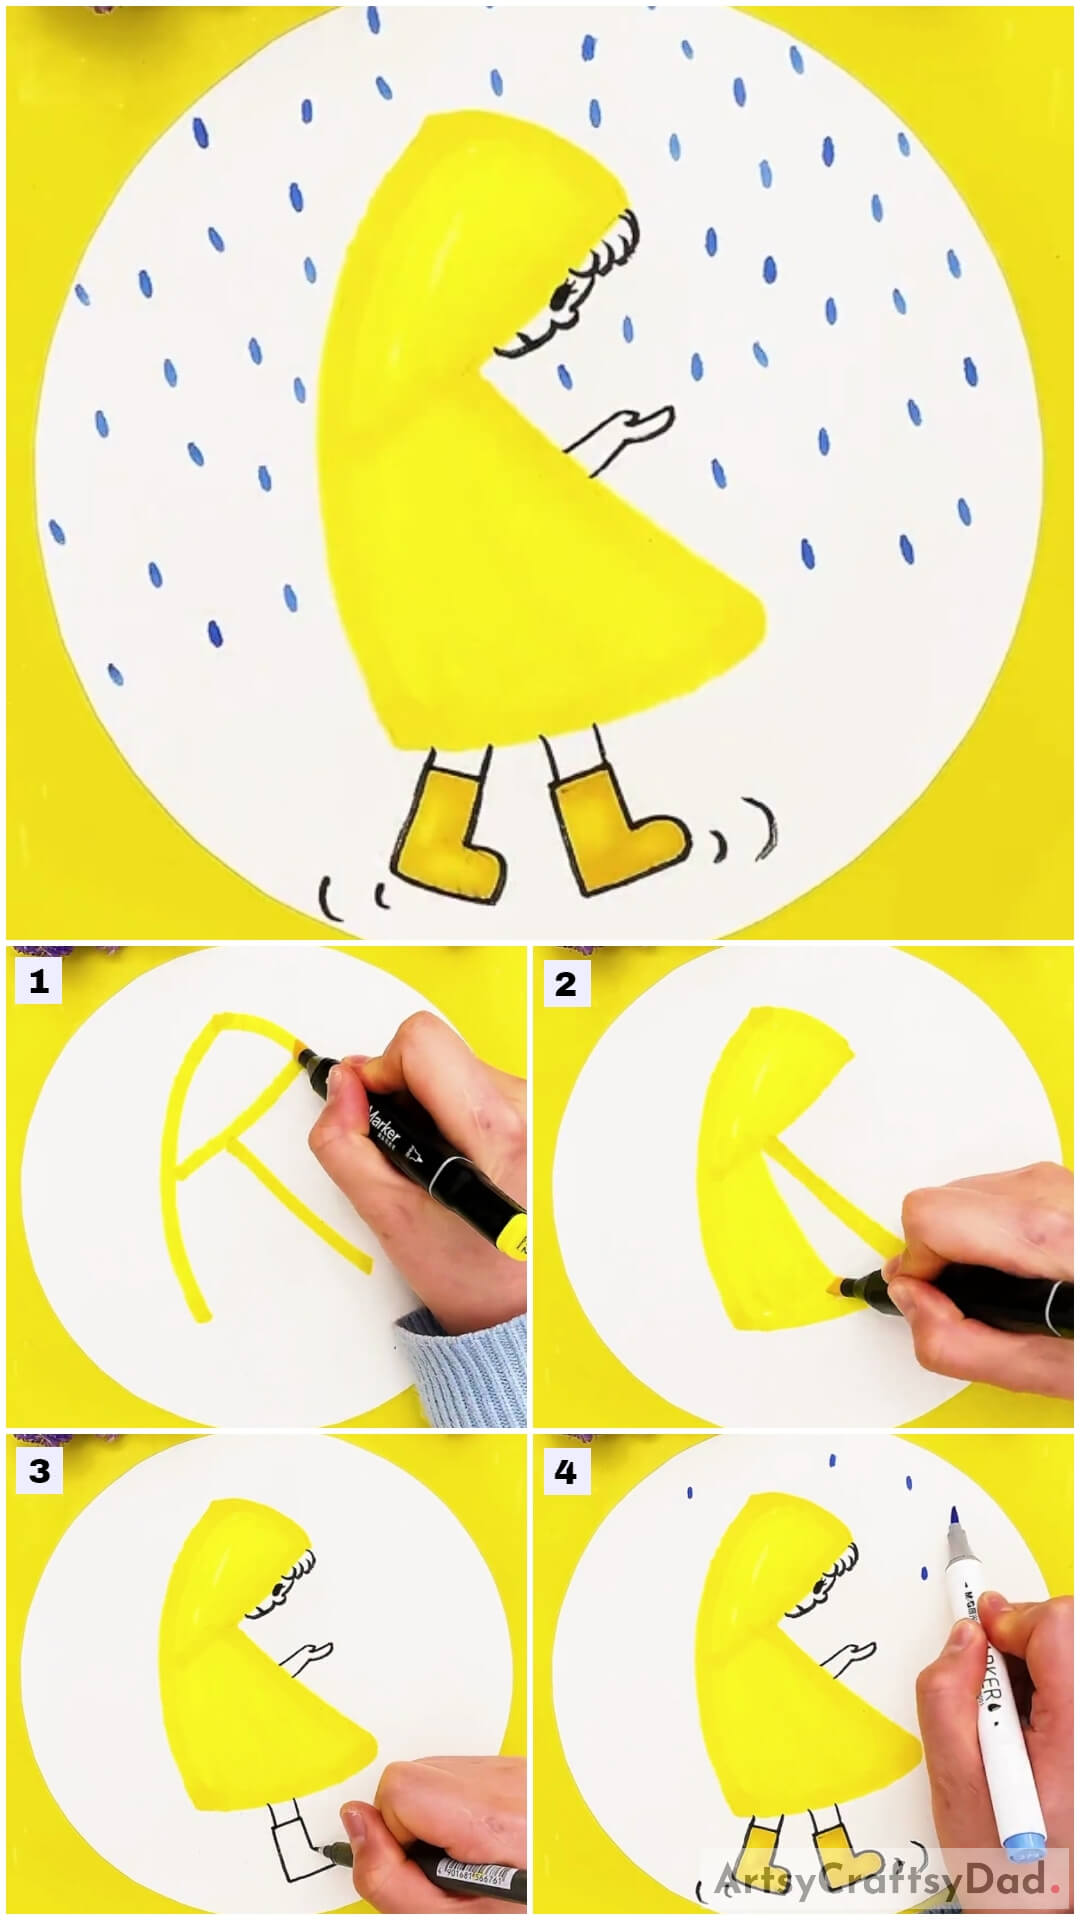  Boy In Raincoat Rainy Day Drawing Tutorial For Kids